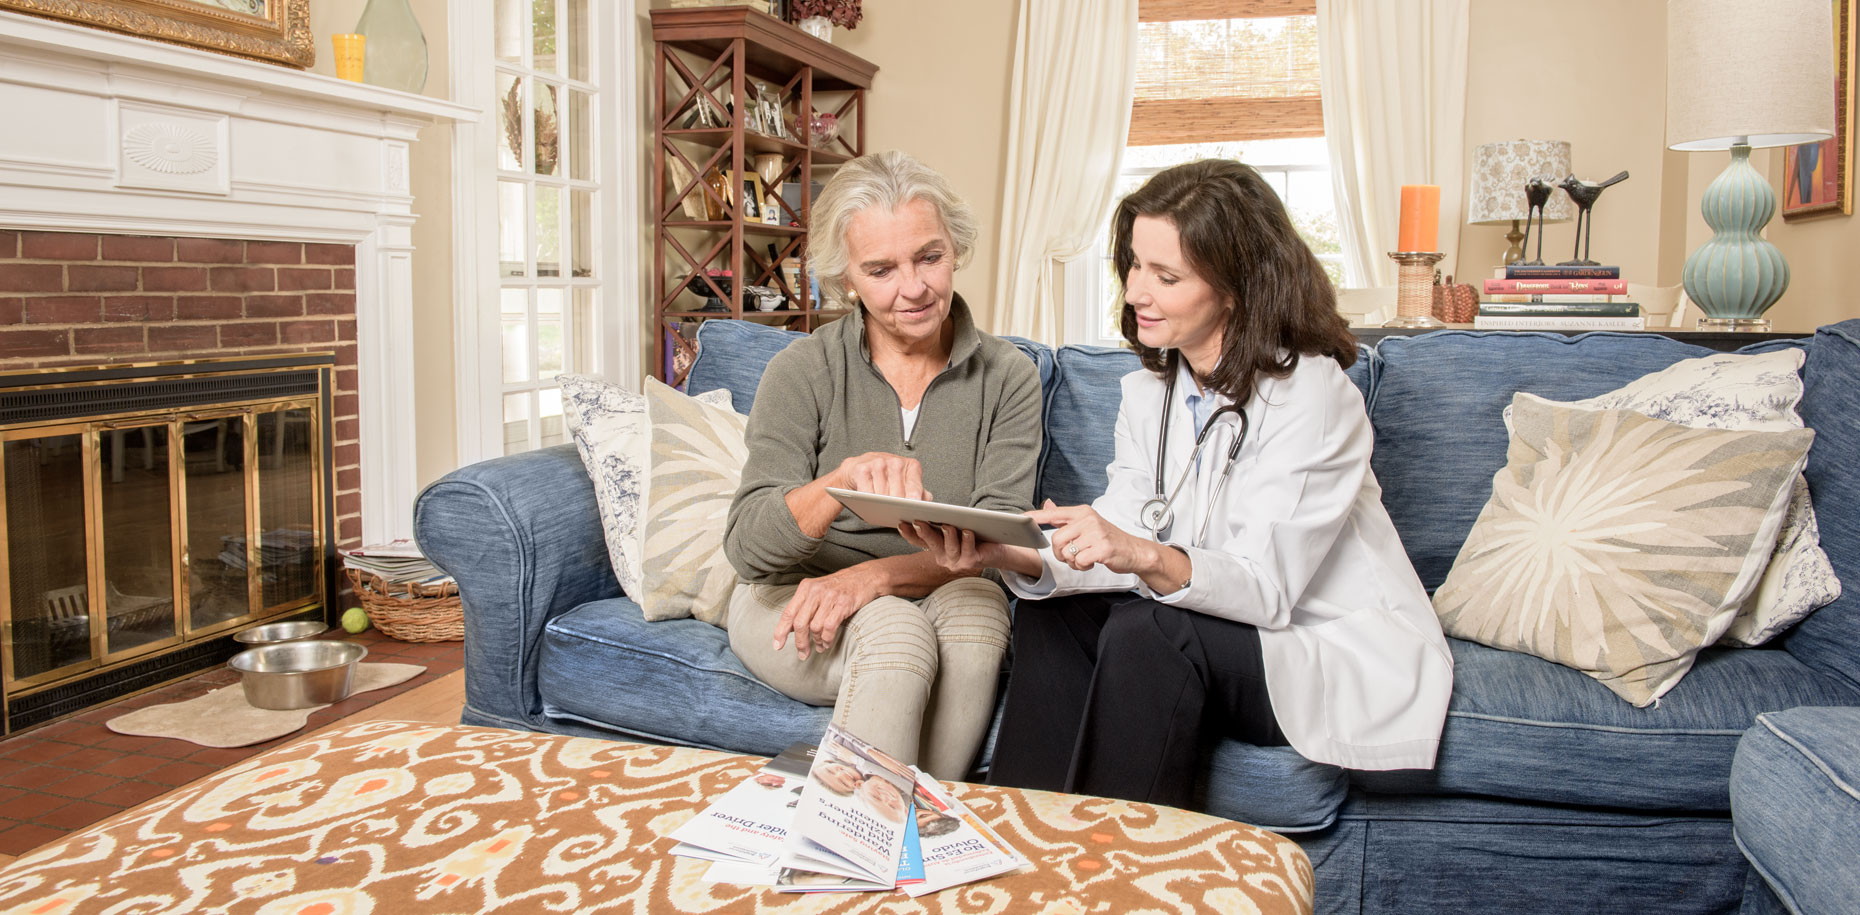 A nurse looks at computer tablet with a retiree on a sofa